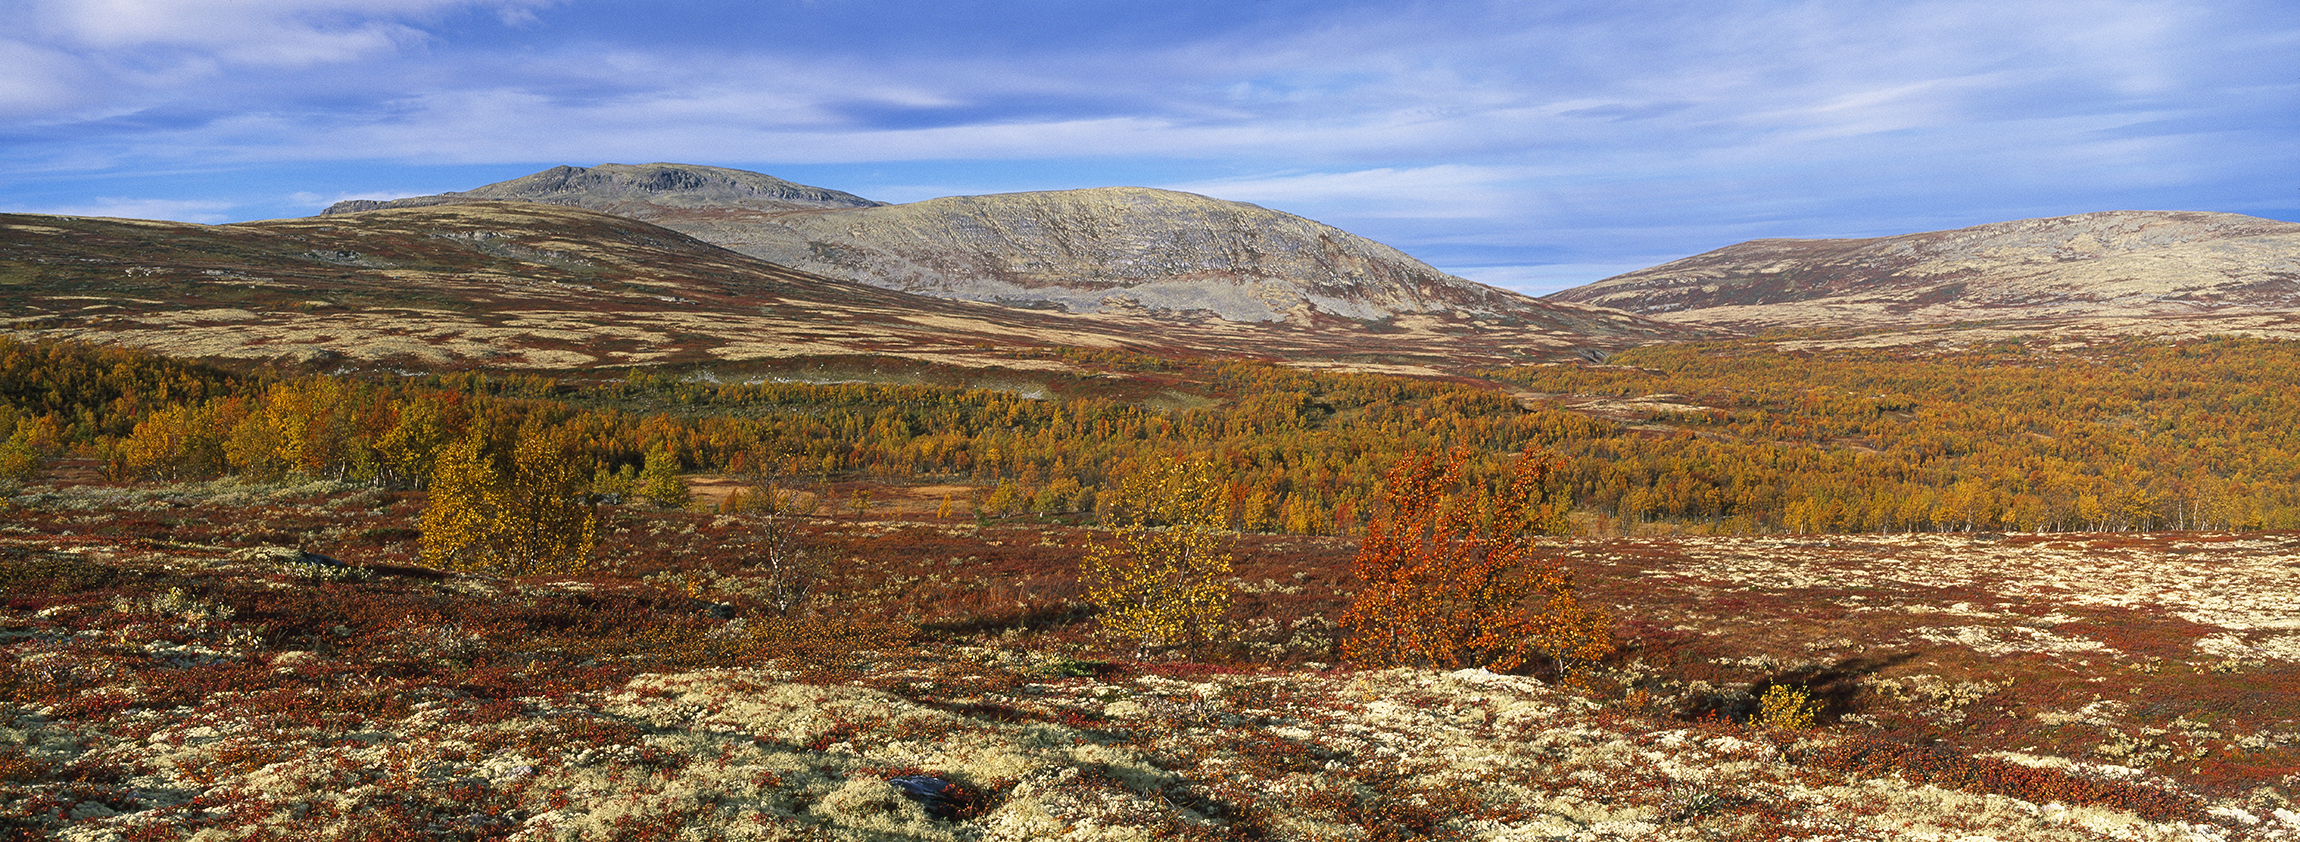 Southern Norway, alpine plants, shrubs and trees carpet the uplands